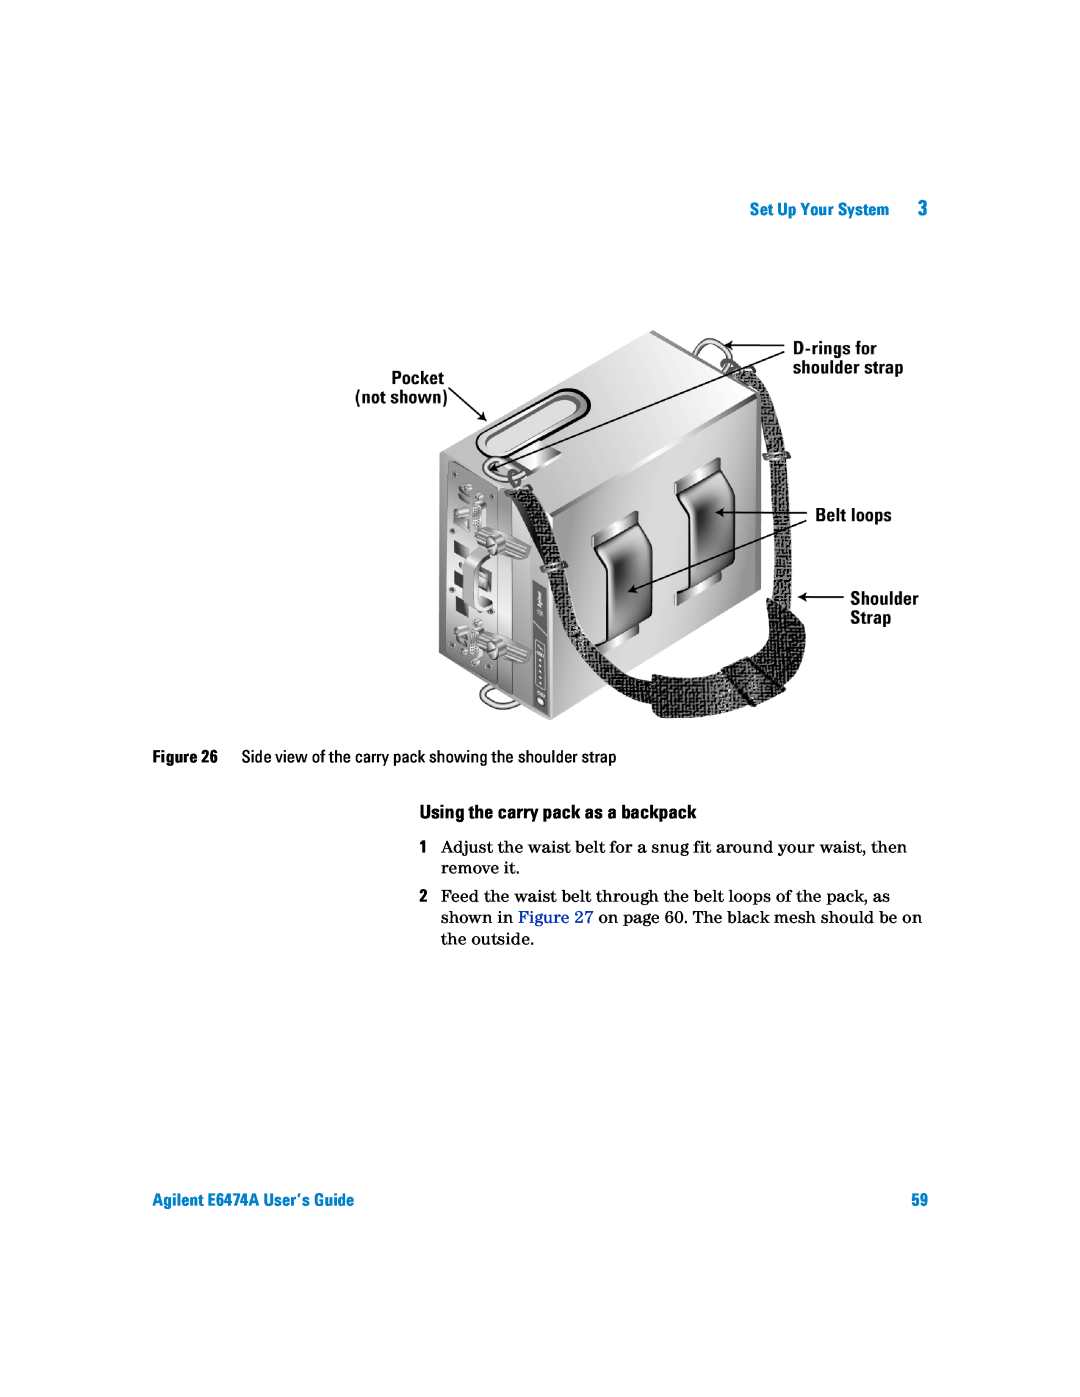 Agilent Technologies manual Using the carry pack as a backpack, Set Up Your System, Agilent E6474A User’s Guide 